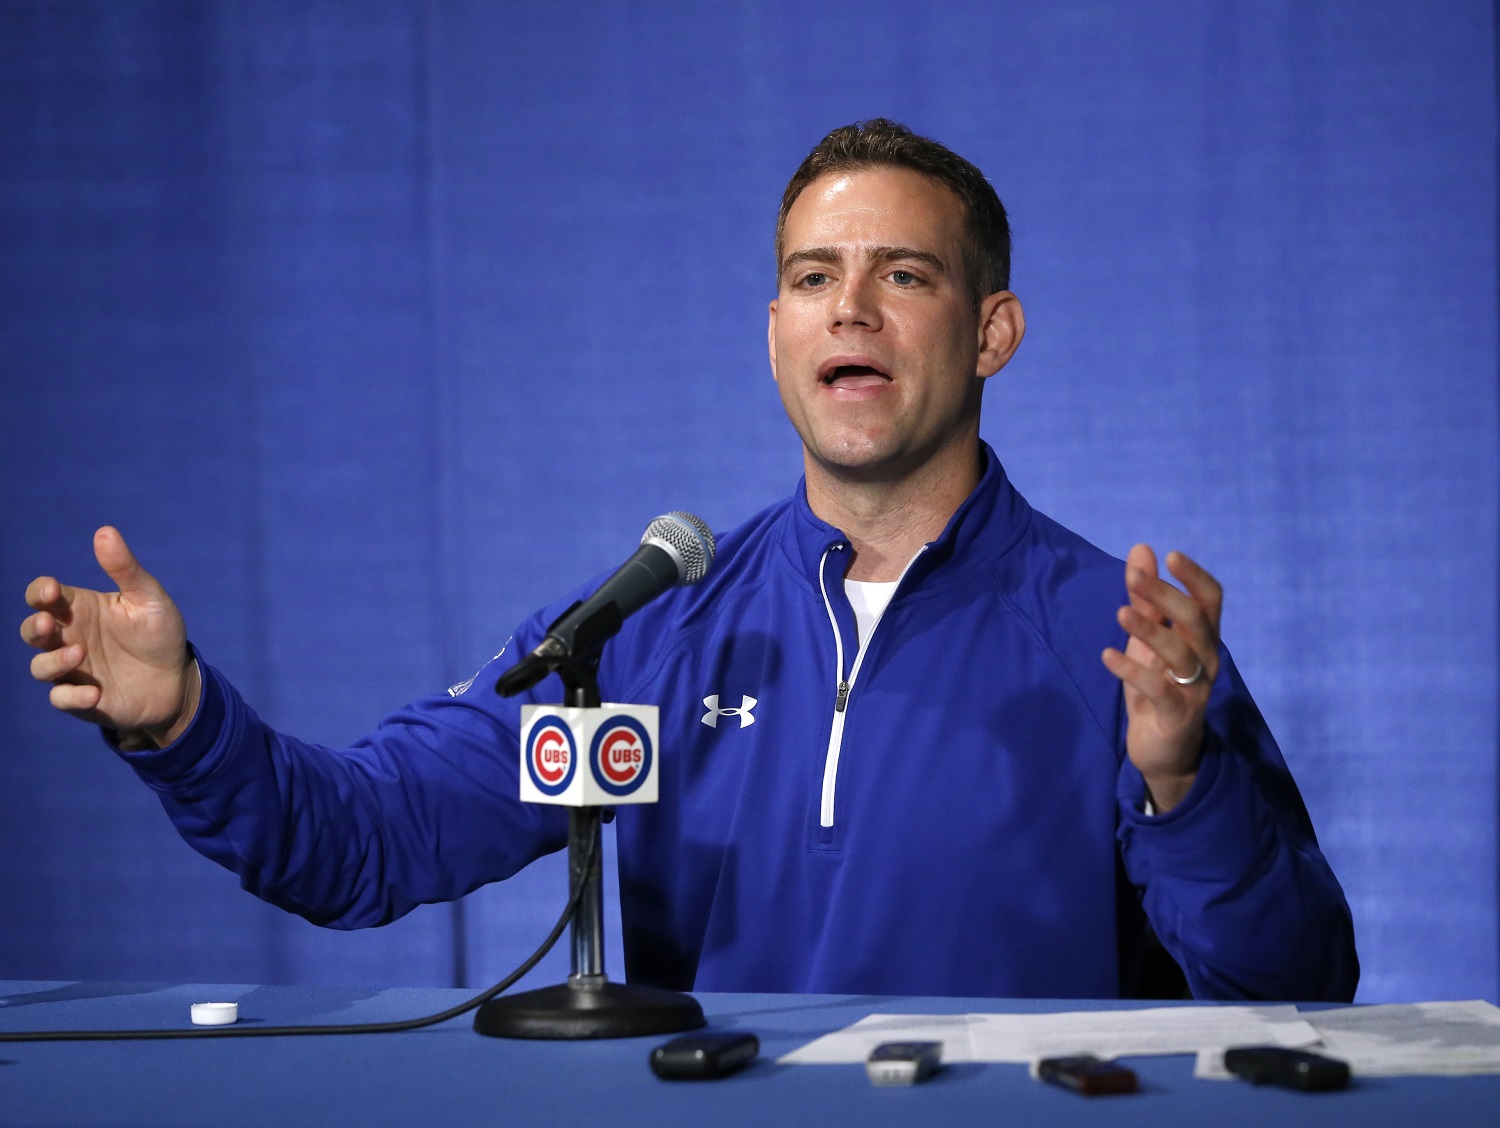 Theo Epstein, President of Baseball Operations for the Chicago Cubs, talks to reporters the day after his ball club was eliminated in the NLCS by the New York Mets. Thursday, Oct. 22, 2015, in Chicago. (AP Photo/Charles Rex Arbogast)